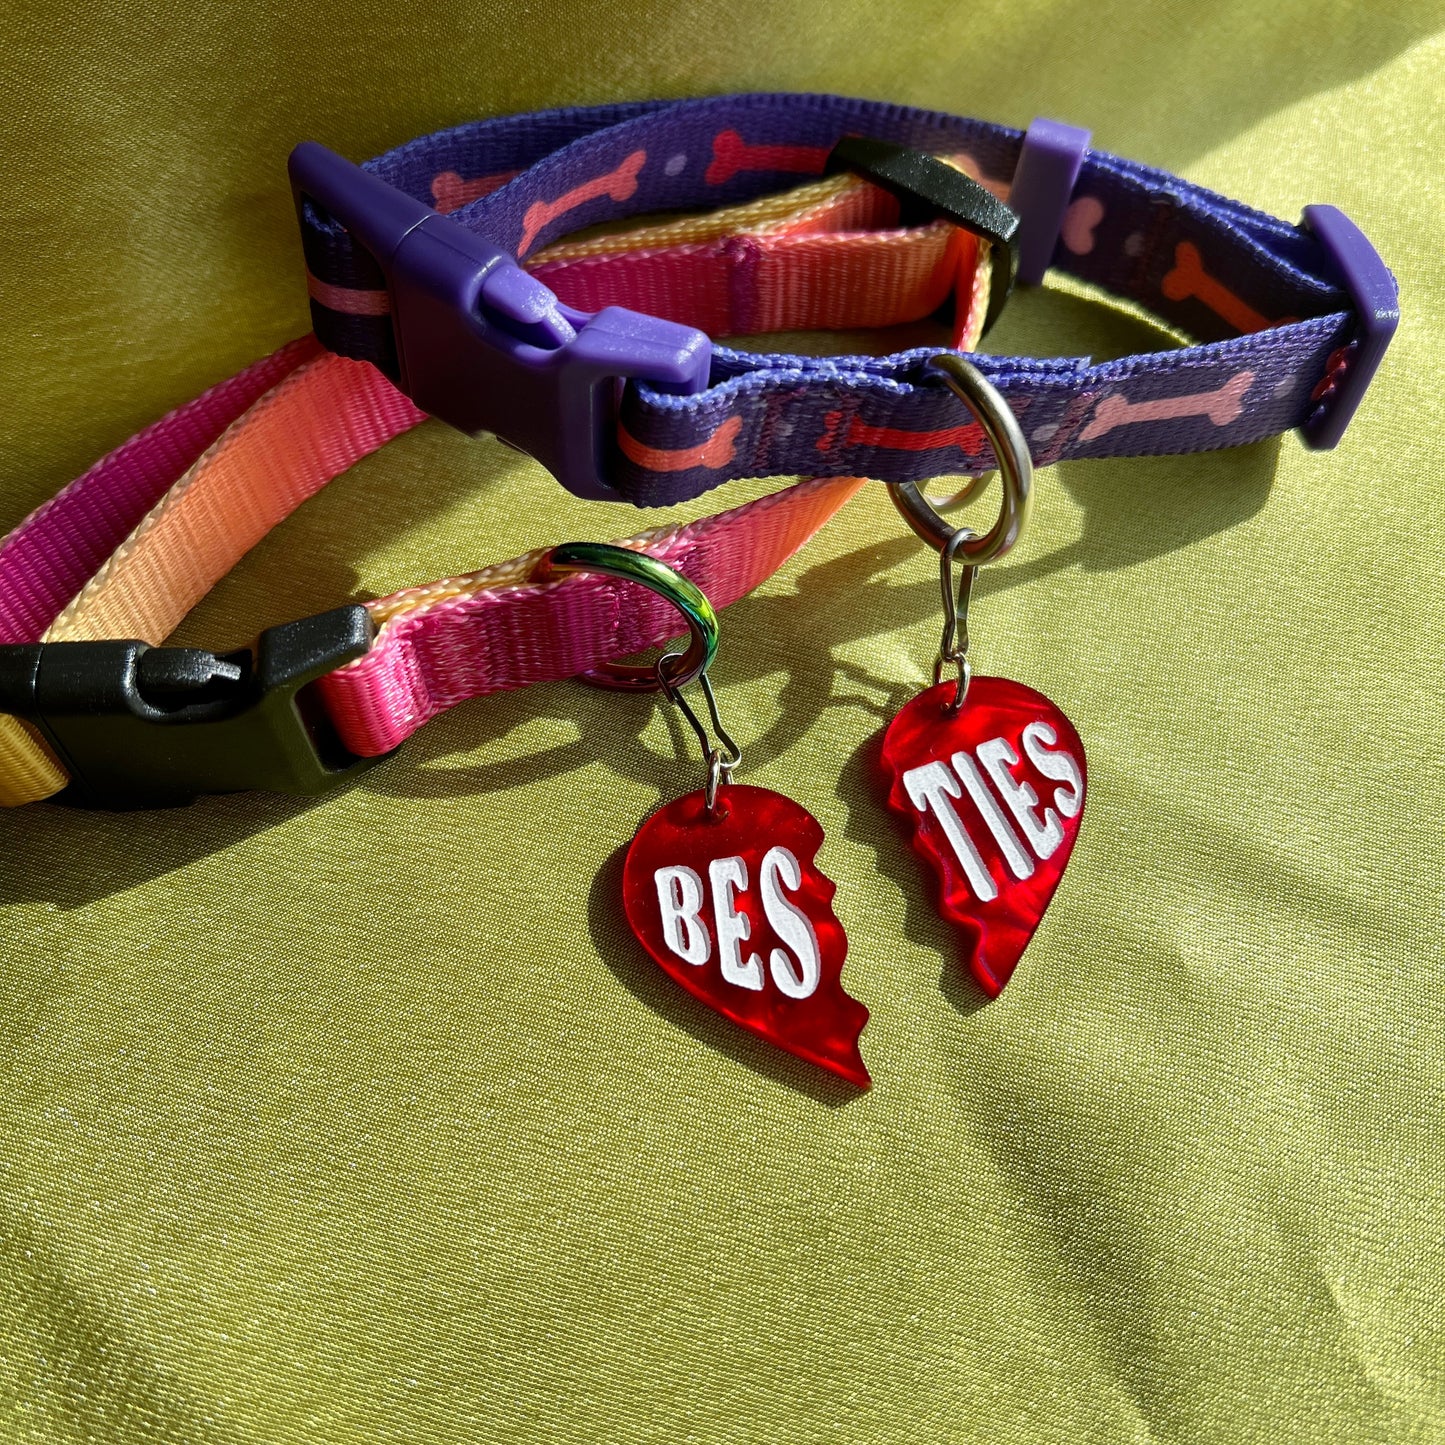 Besties pet tags (comes as a set)